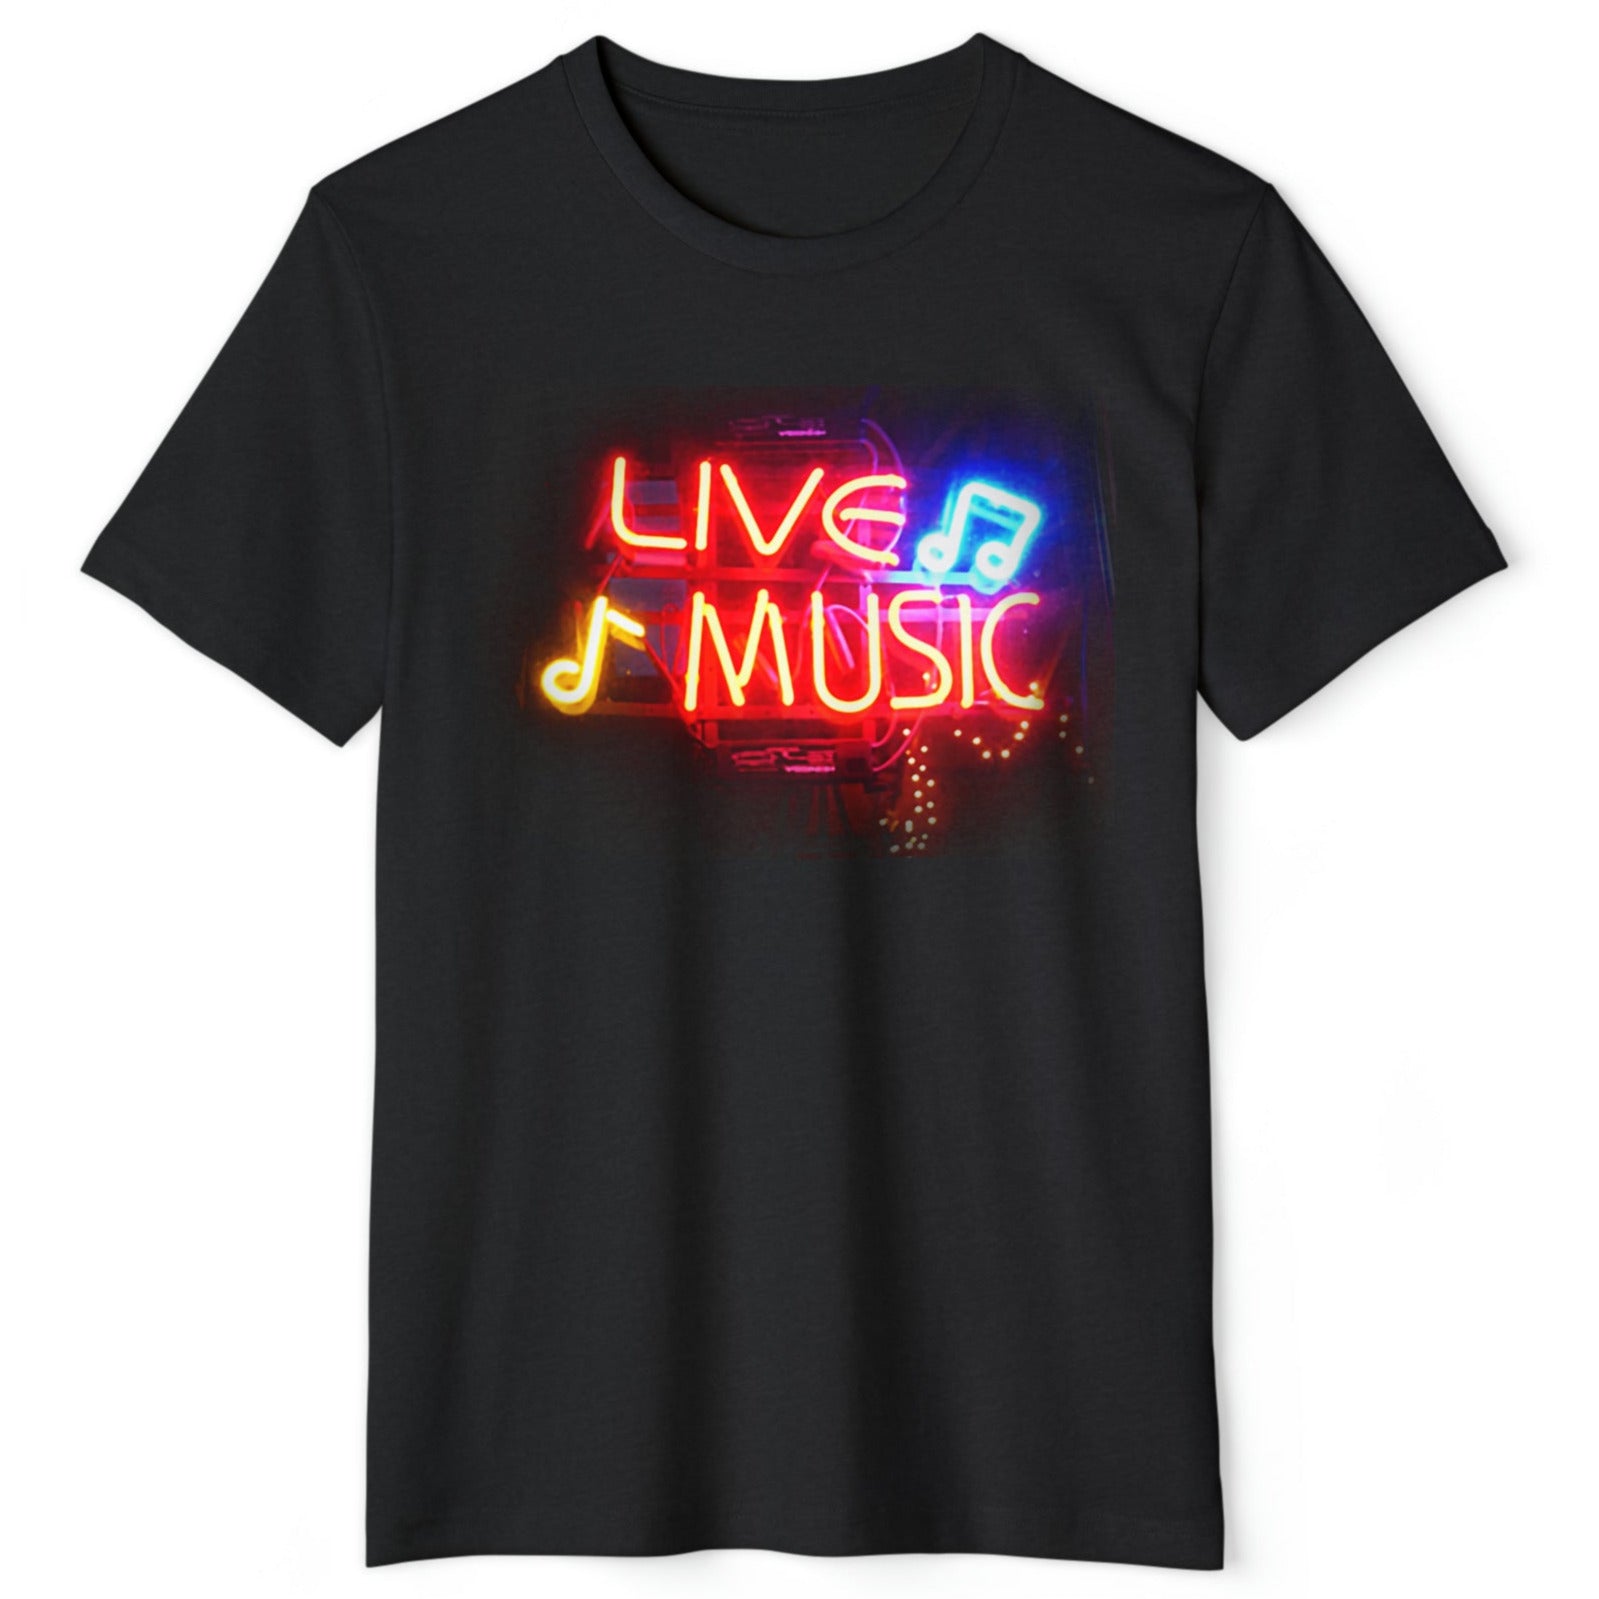 Live MUSIC T-shirt Neon Sign graphic on Recycled Organic fabric